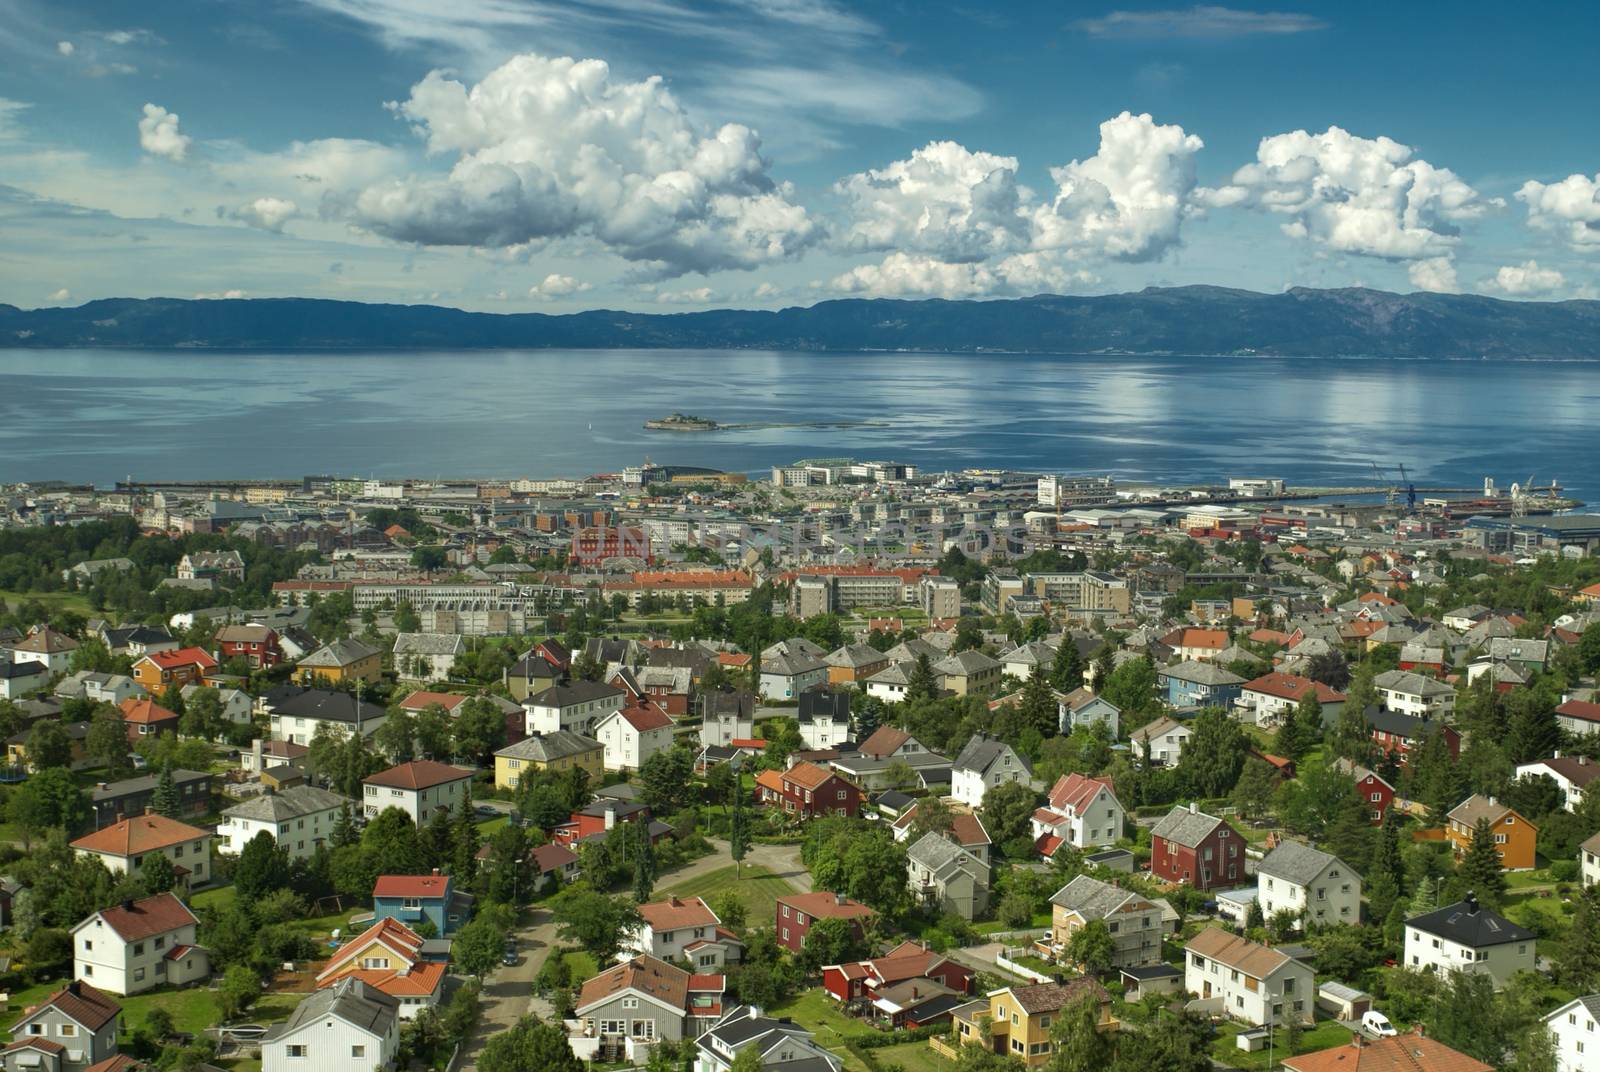 Scenic view of Trondheim's urban area with the fjord in the background